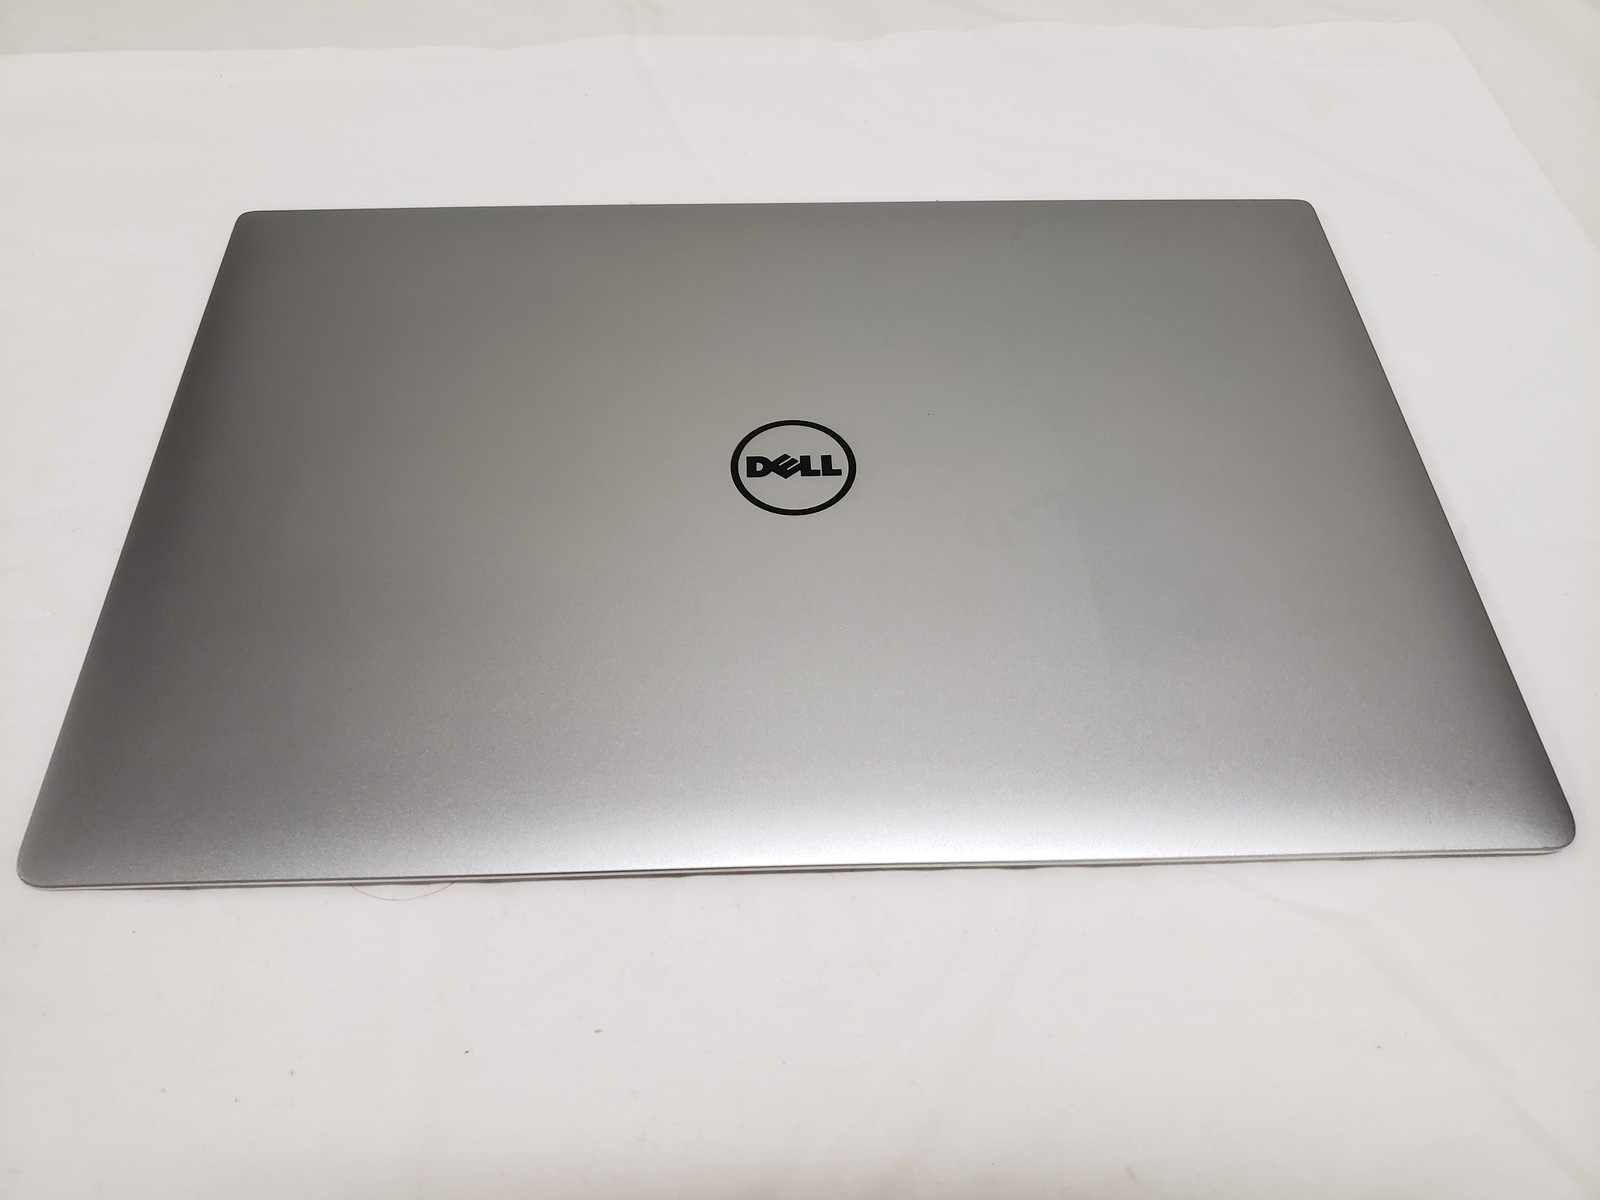 New Dell Xps 15 9550 9560 M5110 M5520 Lcd Back Cover - Netbook - HD Wallpaper 